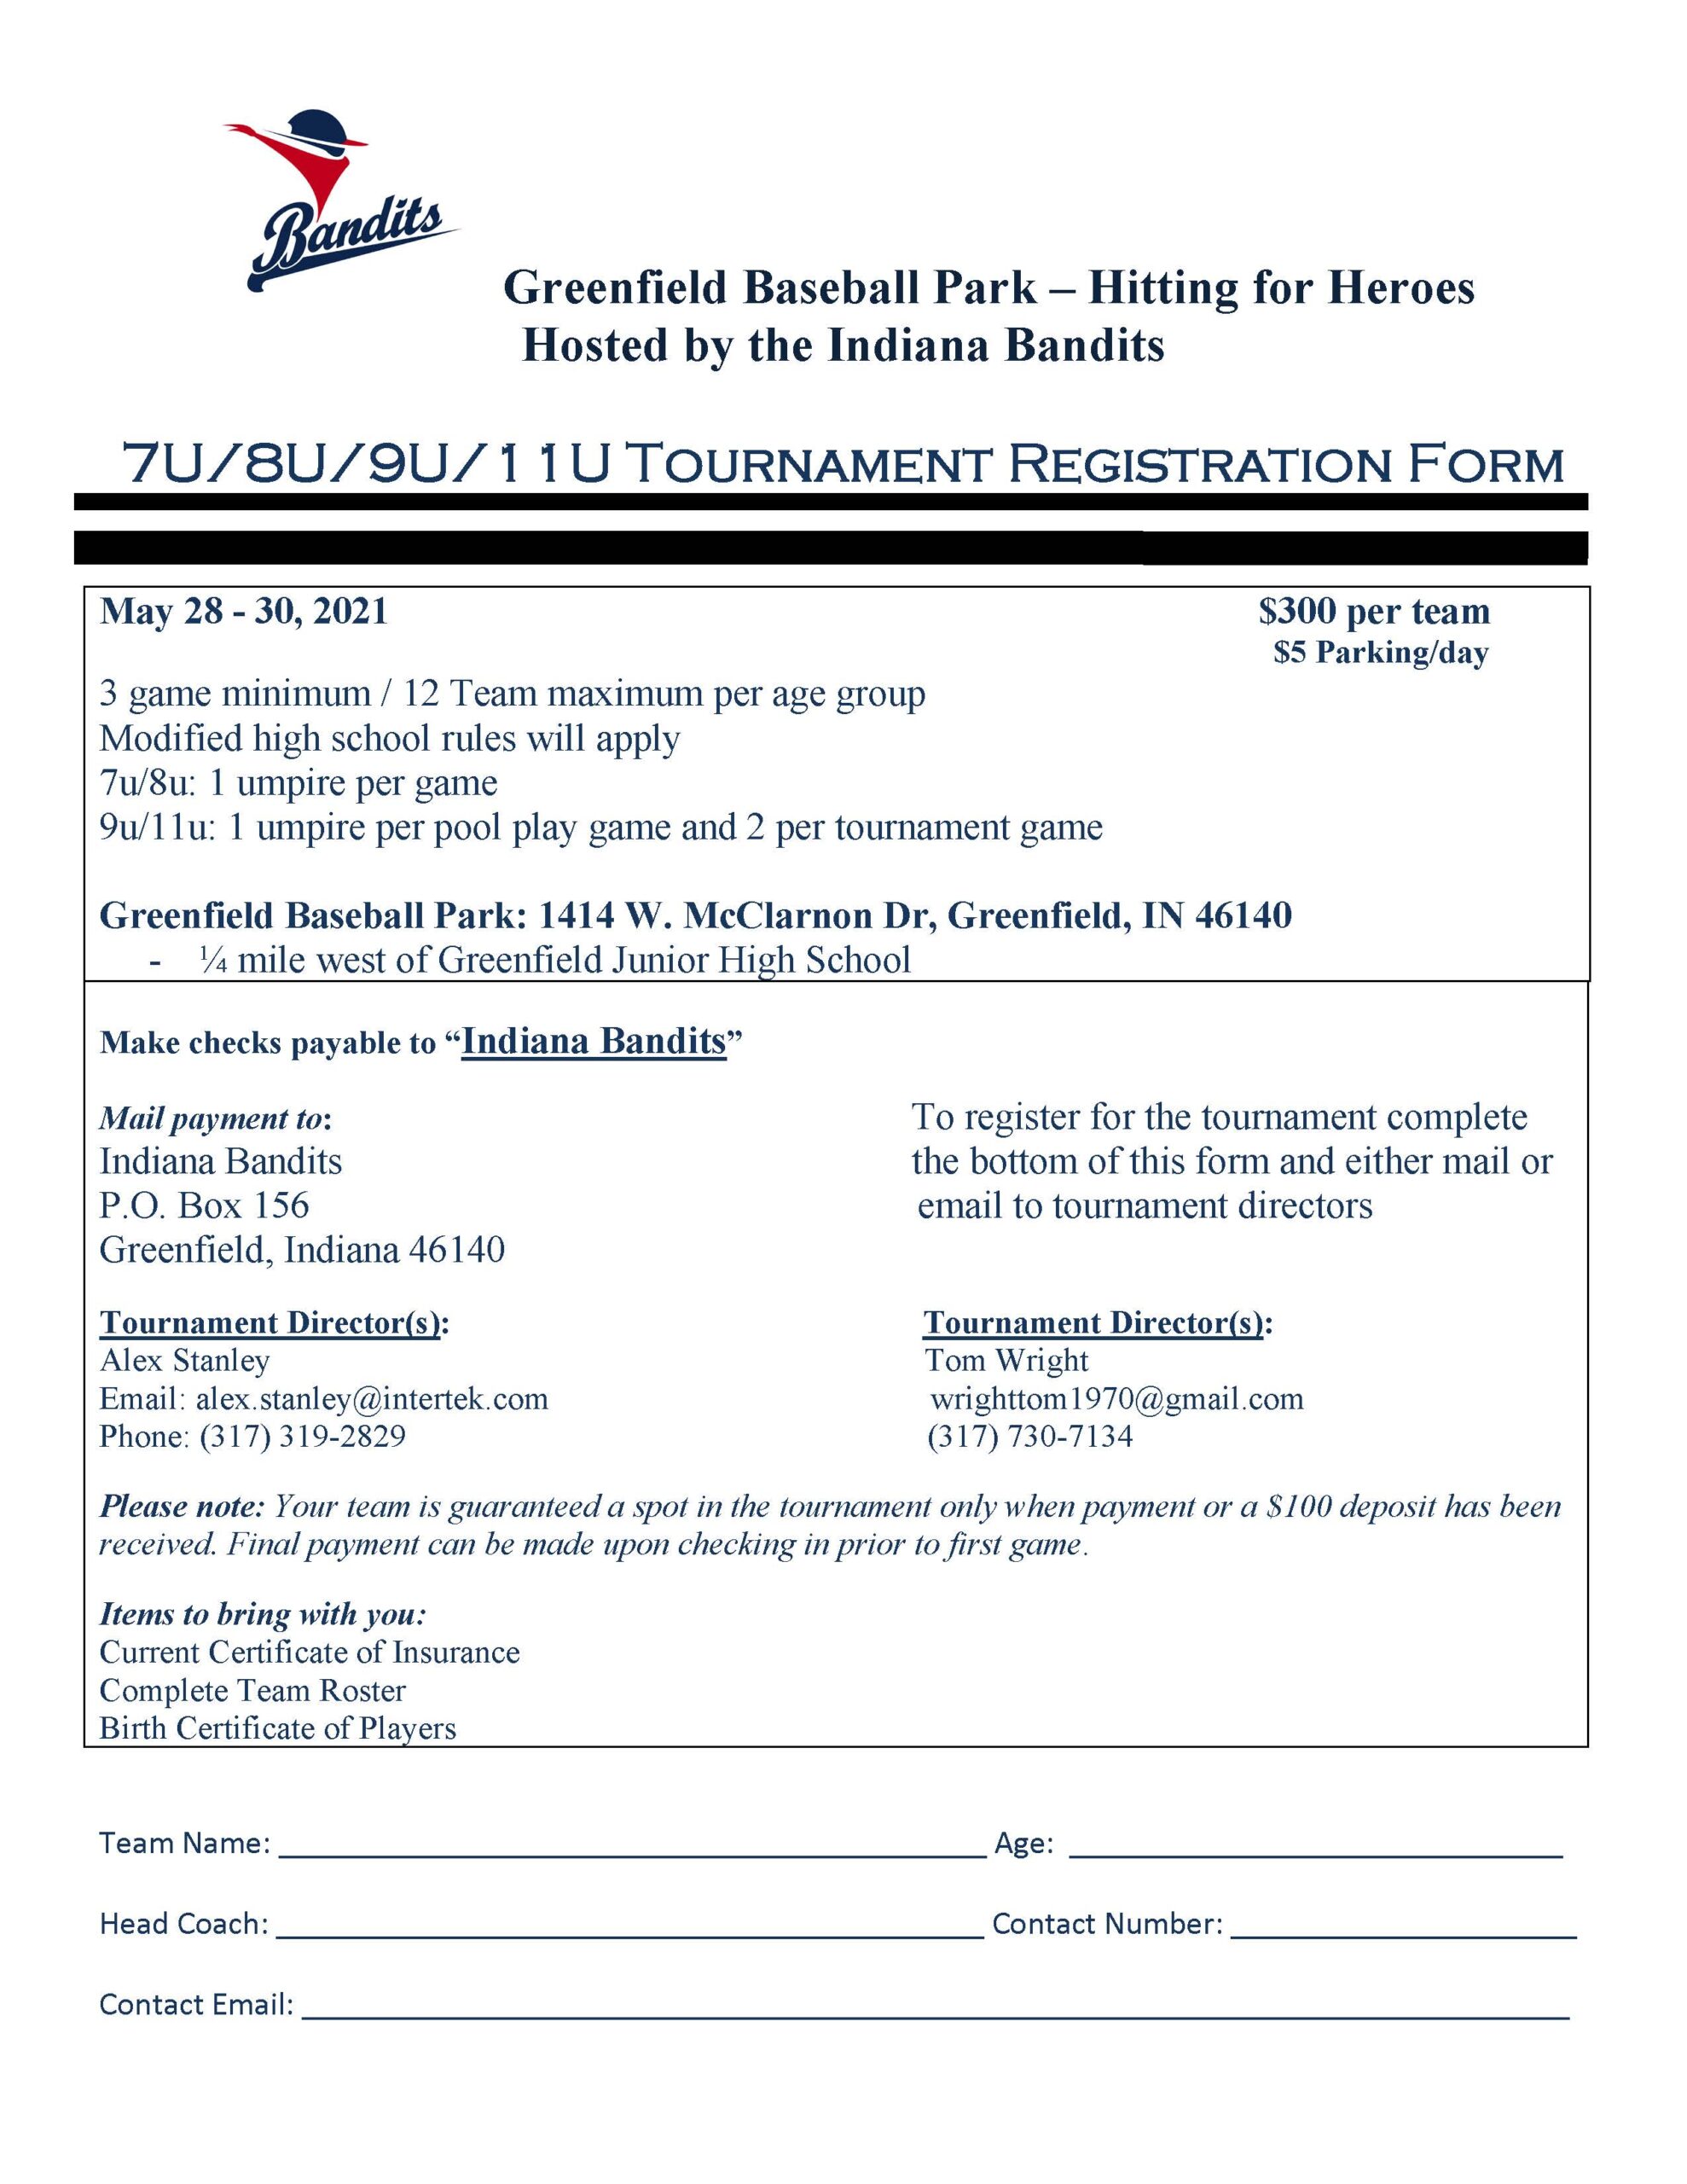 2021 - GBP Hitting for Heroes - May 28-30